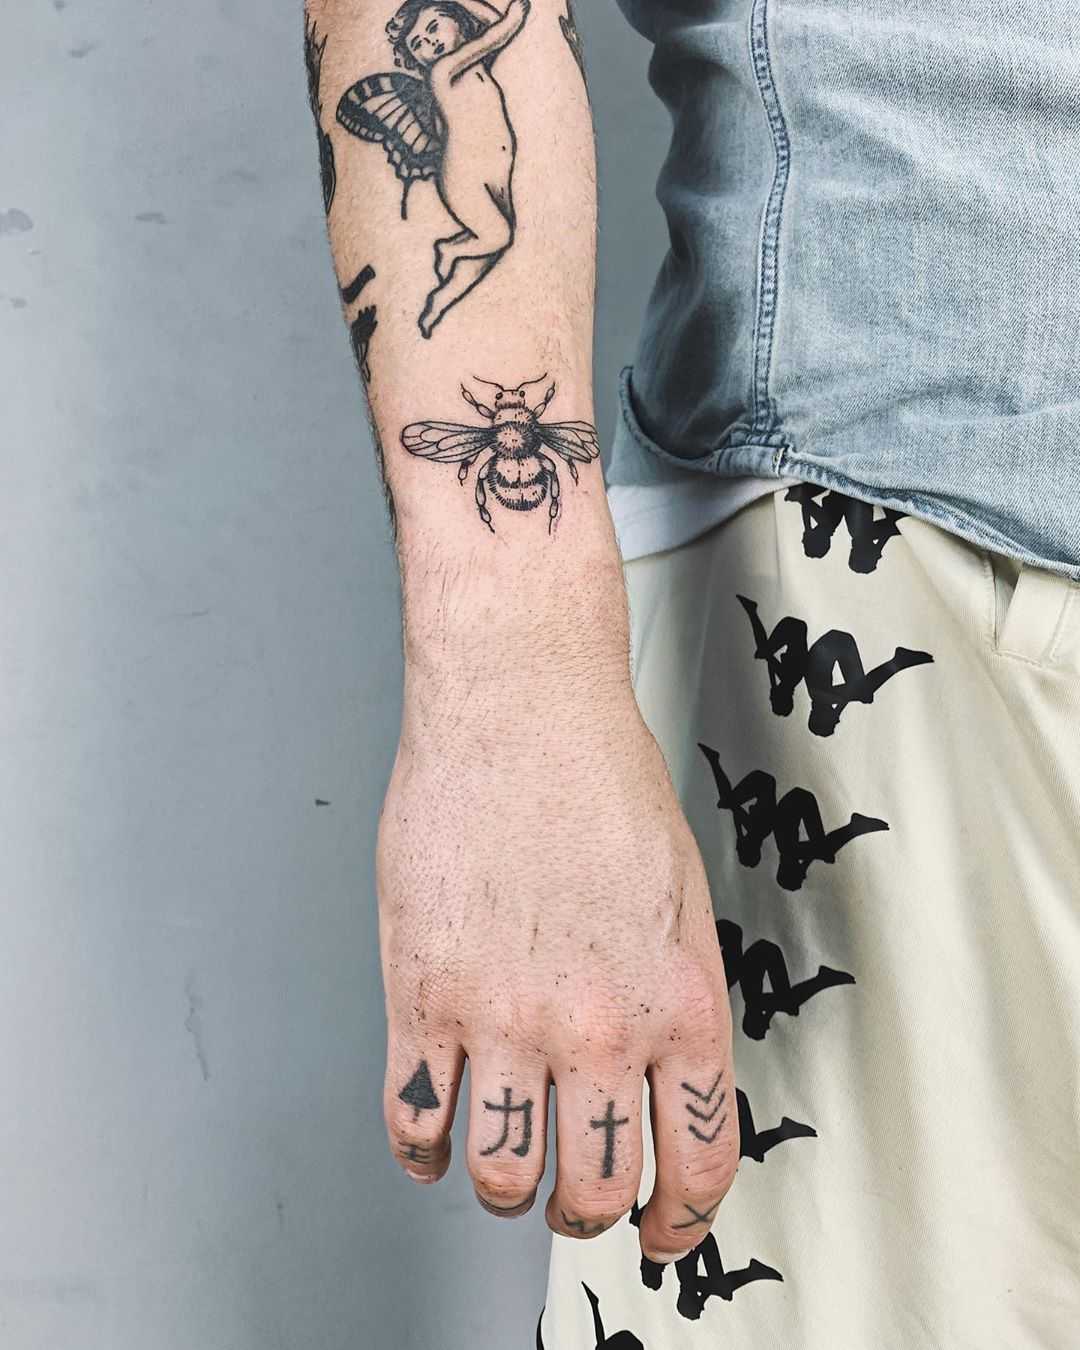 Bee tattoo by Jay Rose